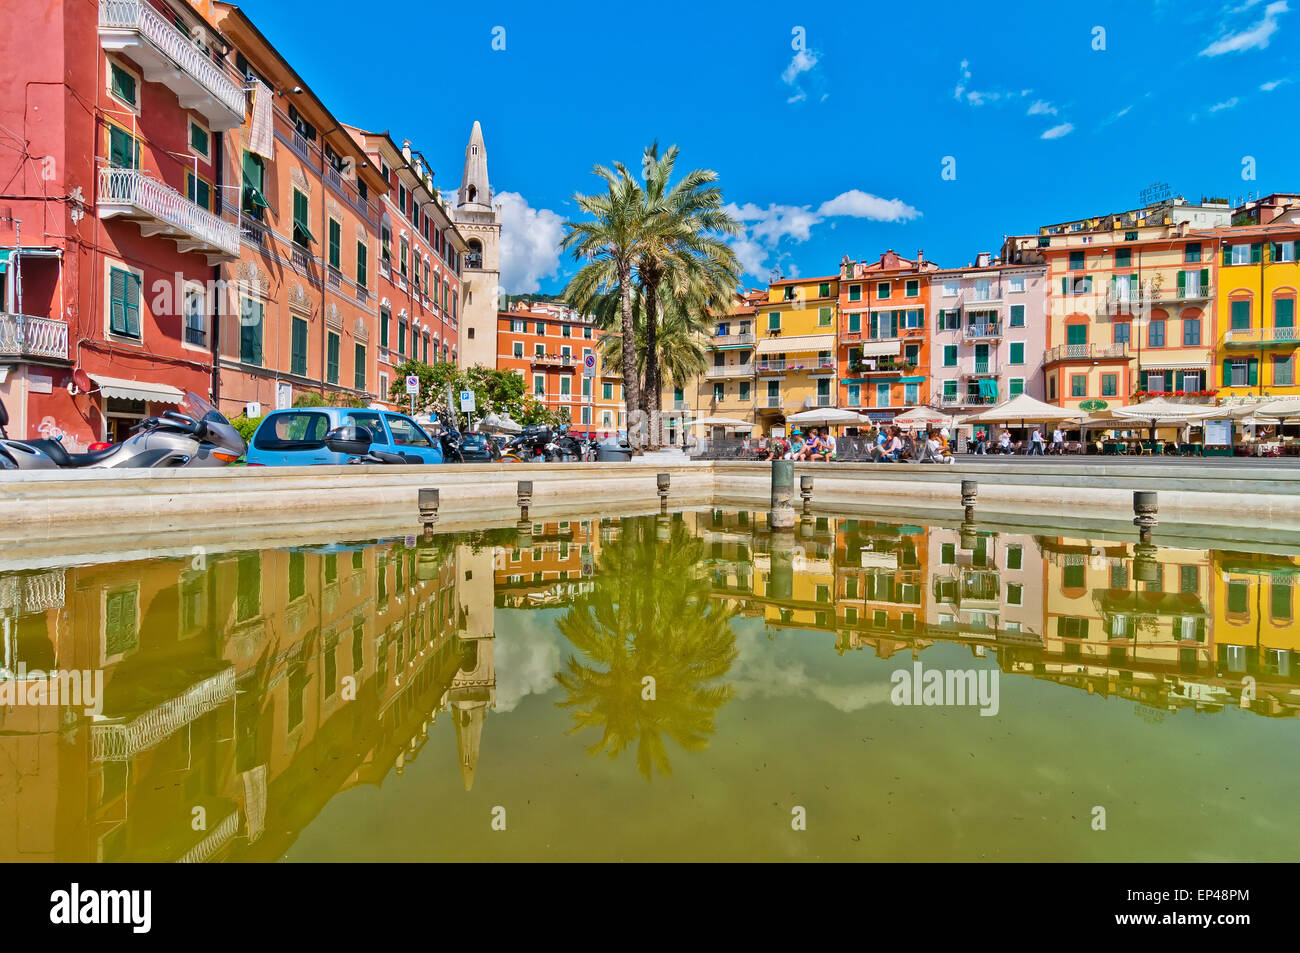 LERICI, ITALY - MAY 31, 2014: tourists visit main square in Lerici, Italy. The bay of Lerici is known as Golfo dei Poeti Stock Photo